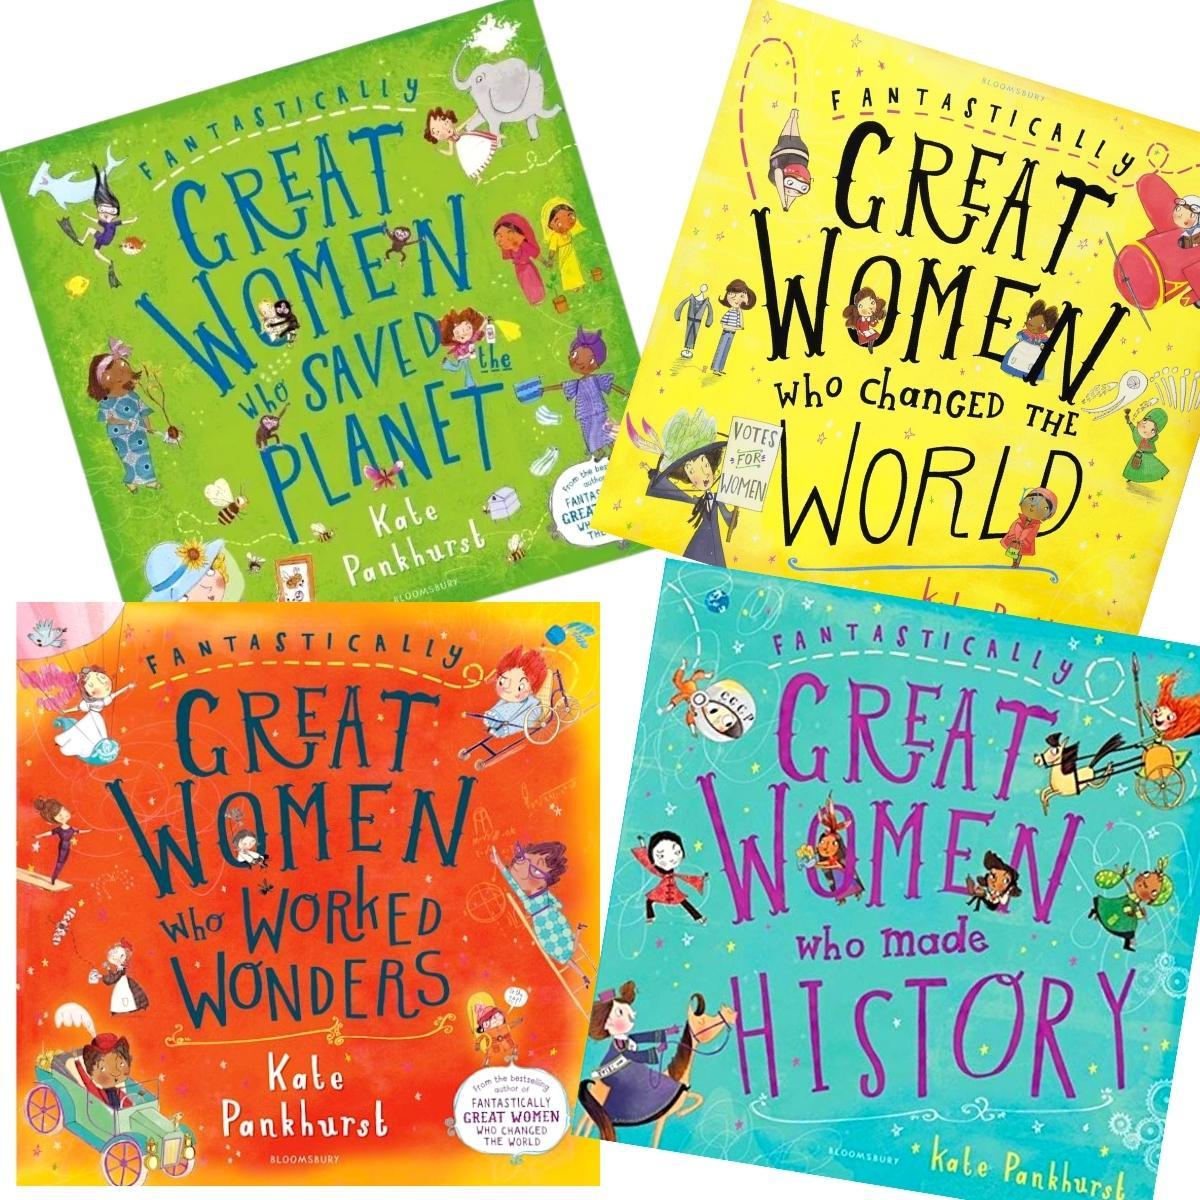 Four colourful Books by Author Kate Pankhurst., 2 at the top and 2 below.